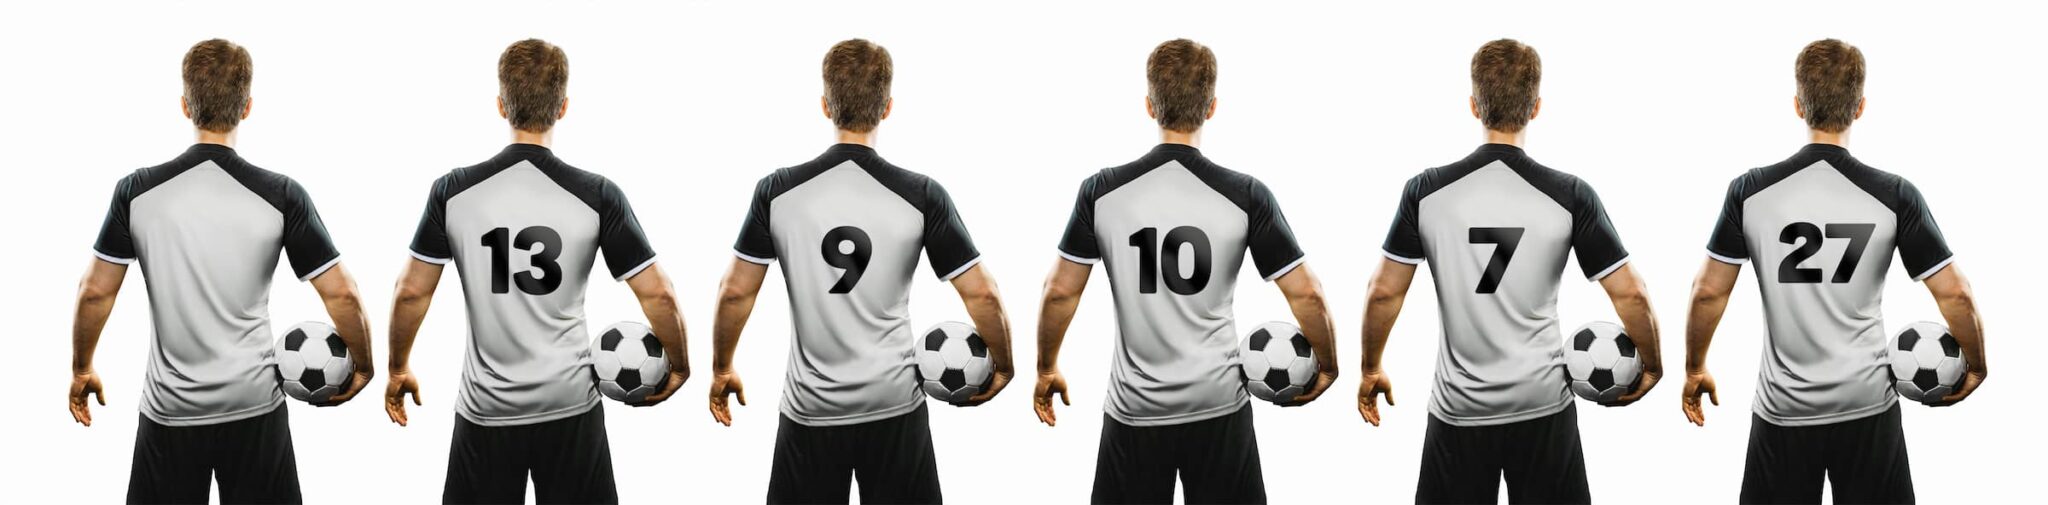 Soccer player holding the ball with his back twisted with different popular shirt numbers